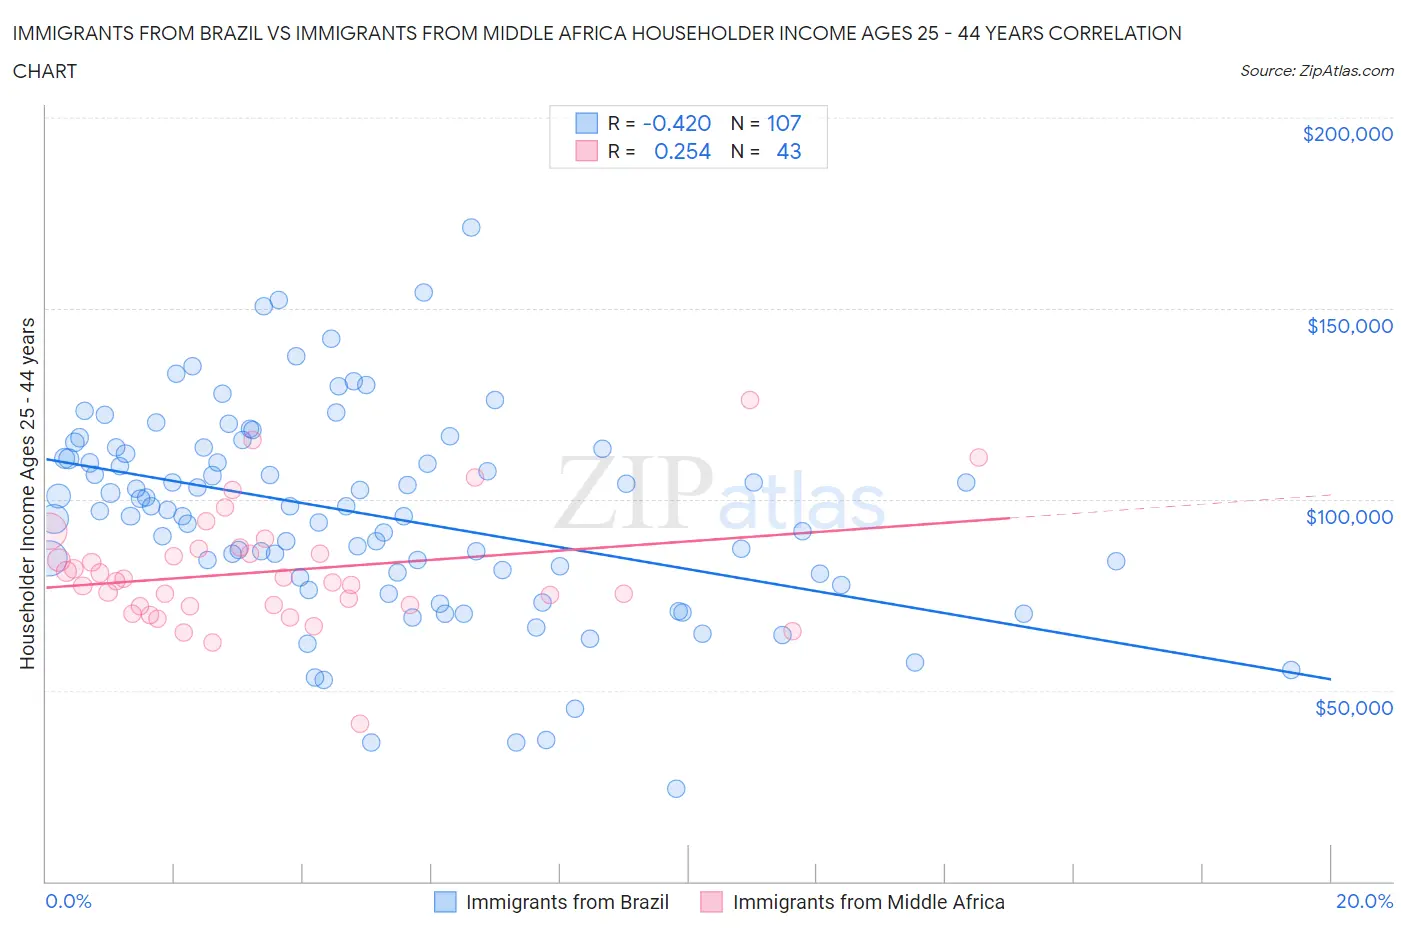 Immigrants from Brazil vs Immigrants from Middle Africa Householder Income Ages 25 - 44 years